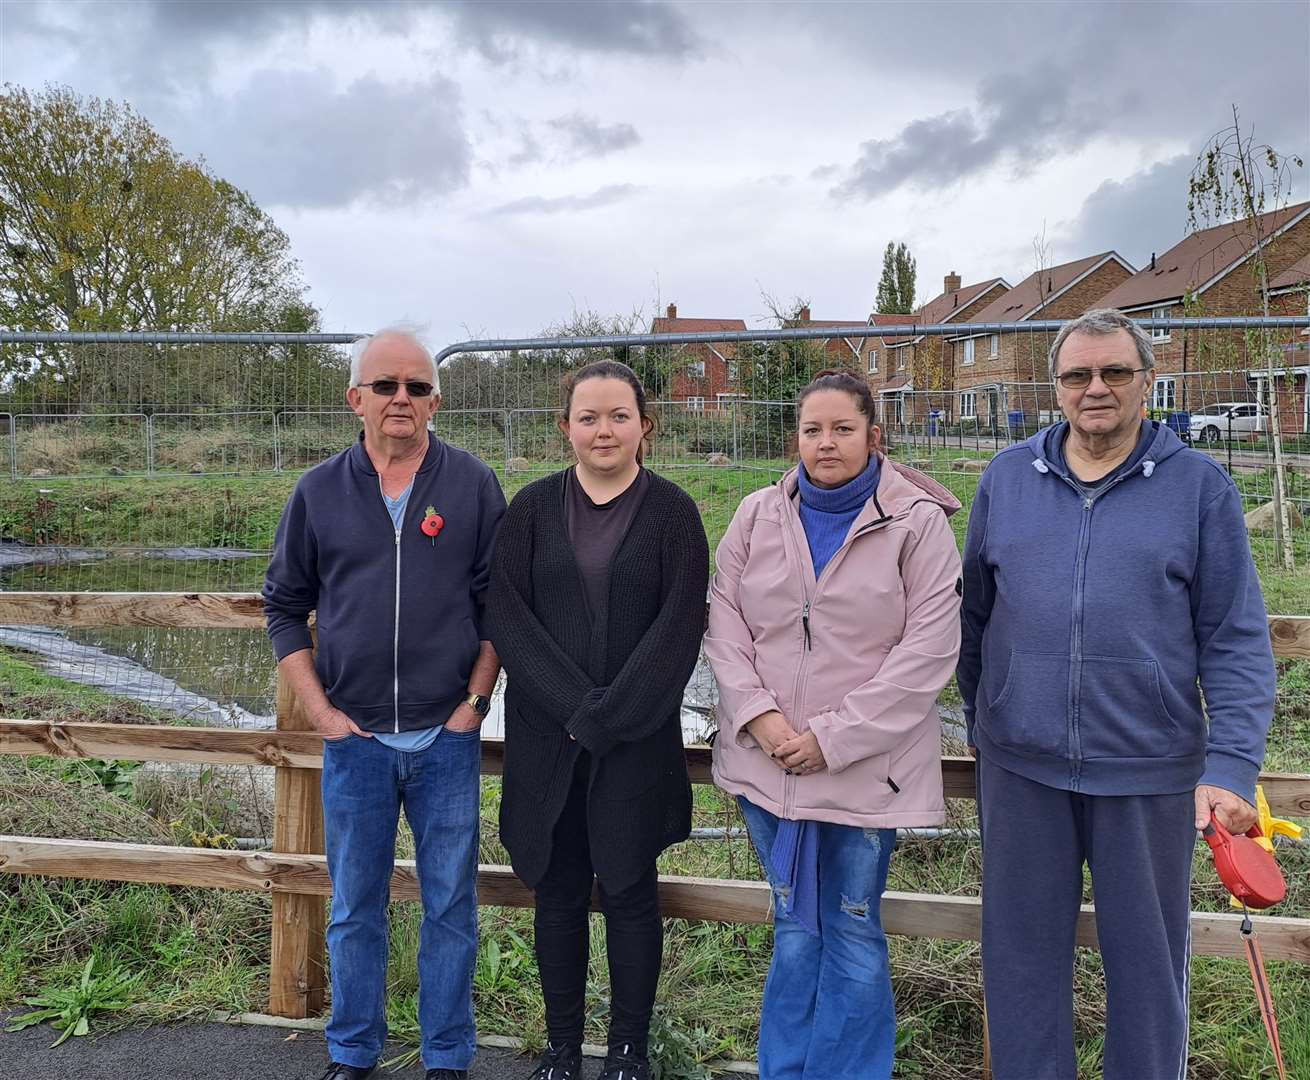 Residents of Blossom Grove estate and the surrounding area. From left: Dave Samworth, Lauren Samworth, Lynne Donkin and Stephen Creed